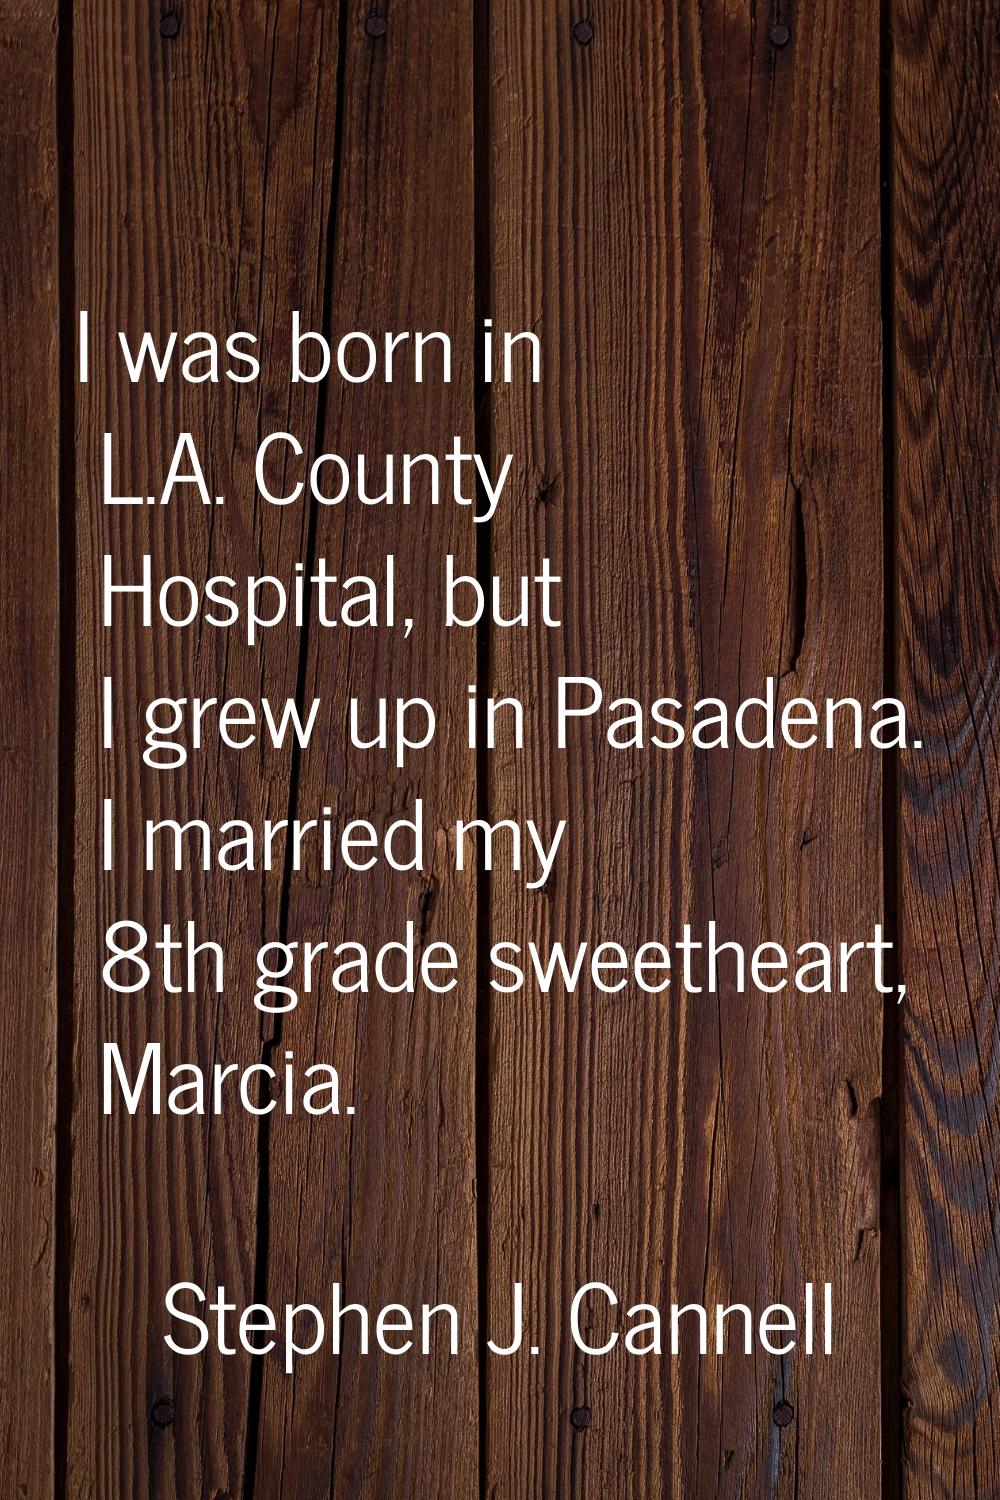 I was born in L.A. County Hospital, but I grew up in Pasadena. I married my 8th grade sweetheart, M